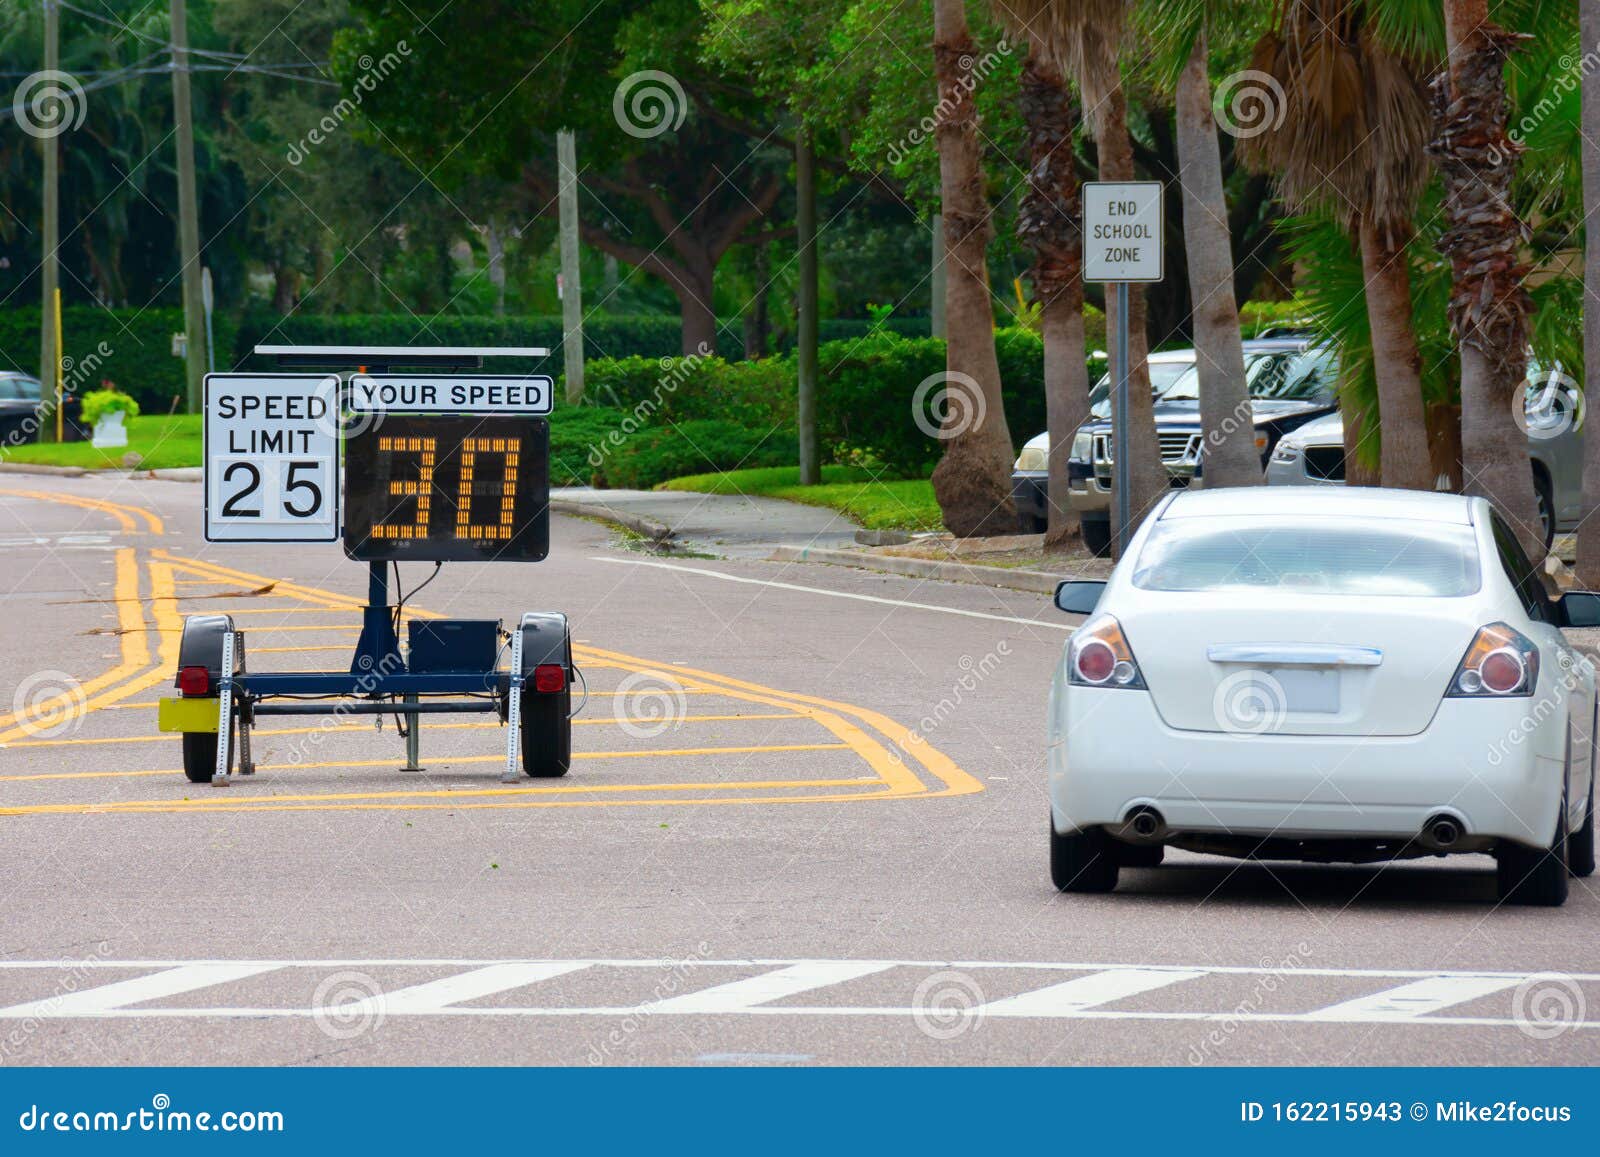 radar speed limit indicator sign showing 30 proving a passing car is speeding as it drives down the road in a school zone